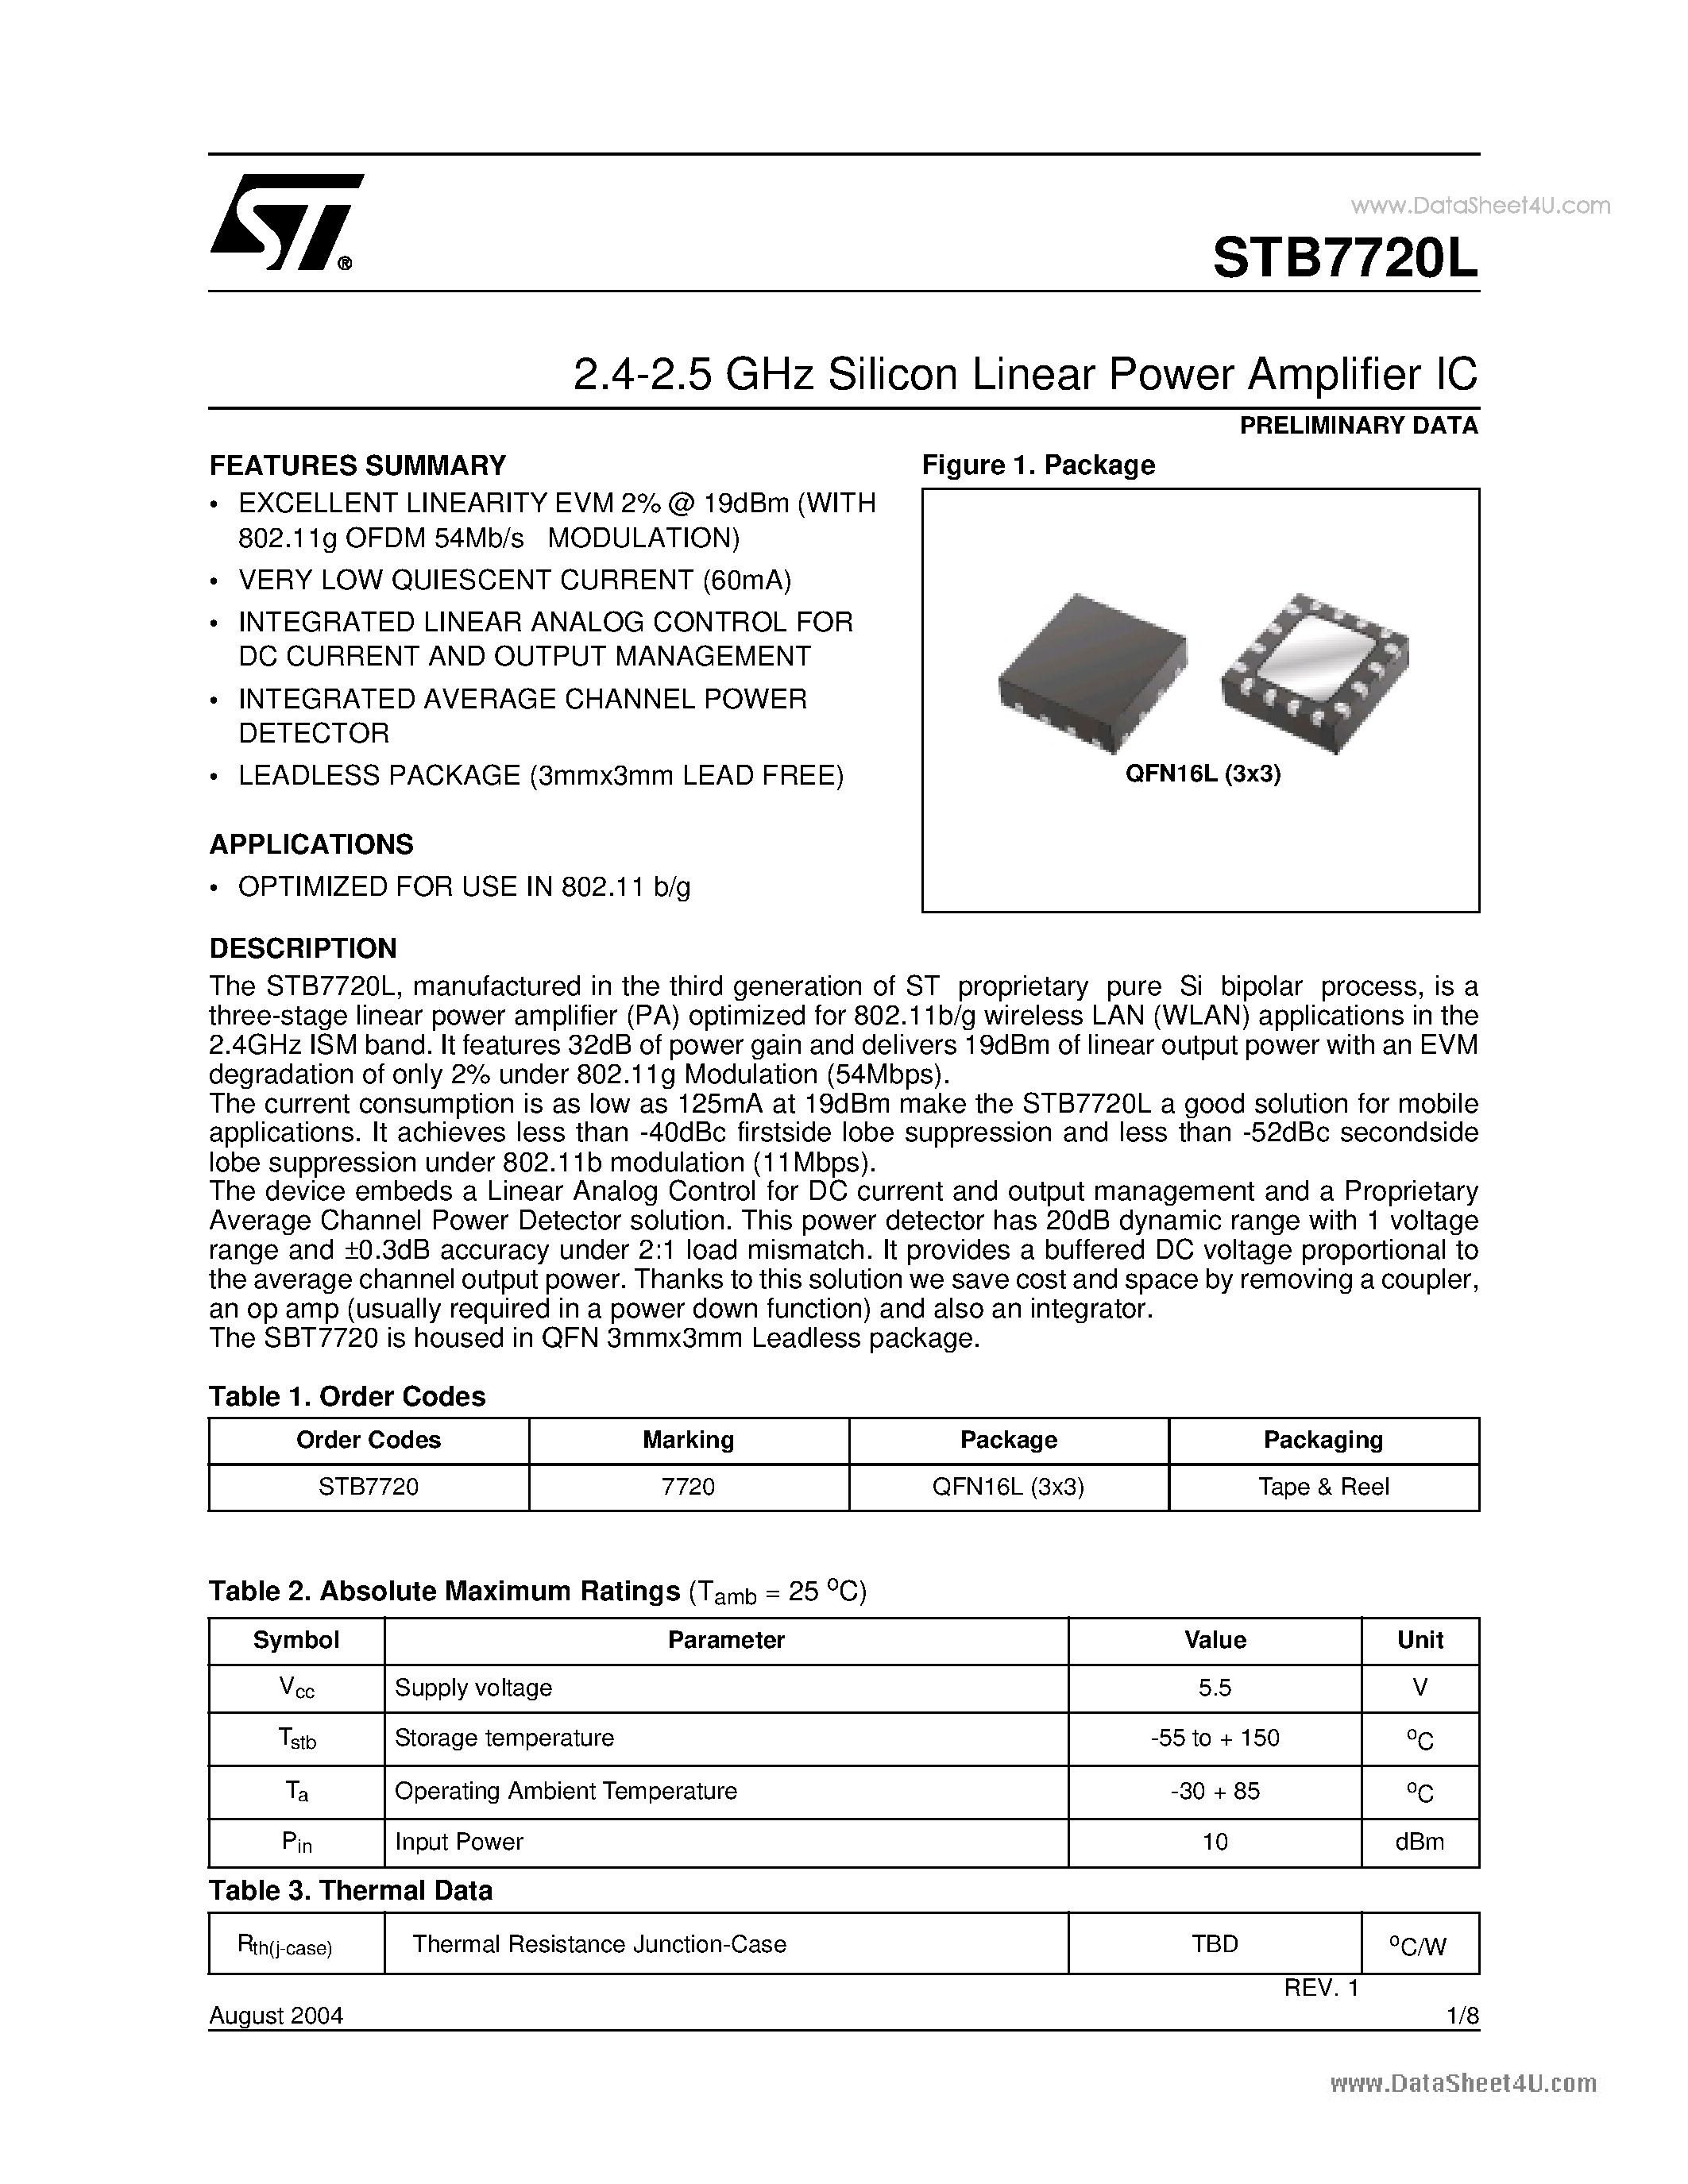 Datasheet STB7720L - 2.4-2.5 GHz Silicon Linear Power Amplifier IC page 1